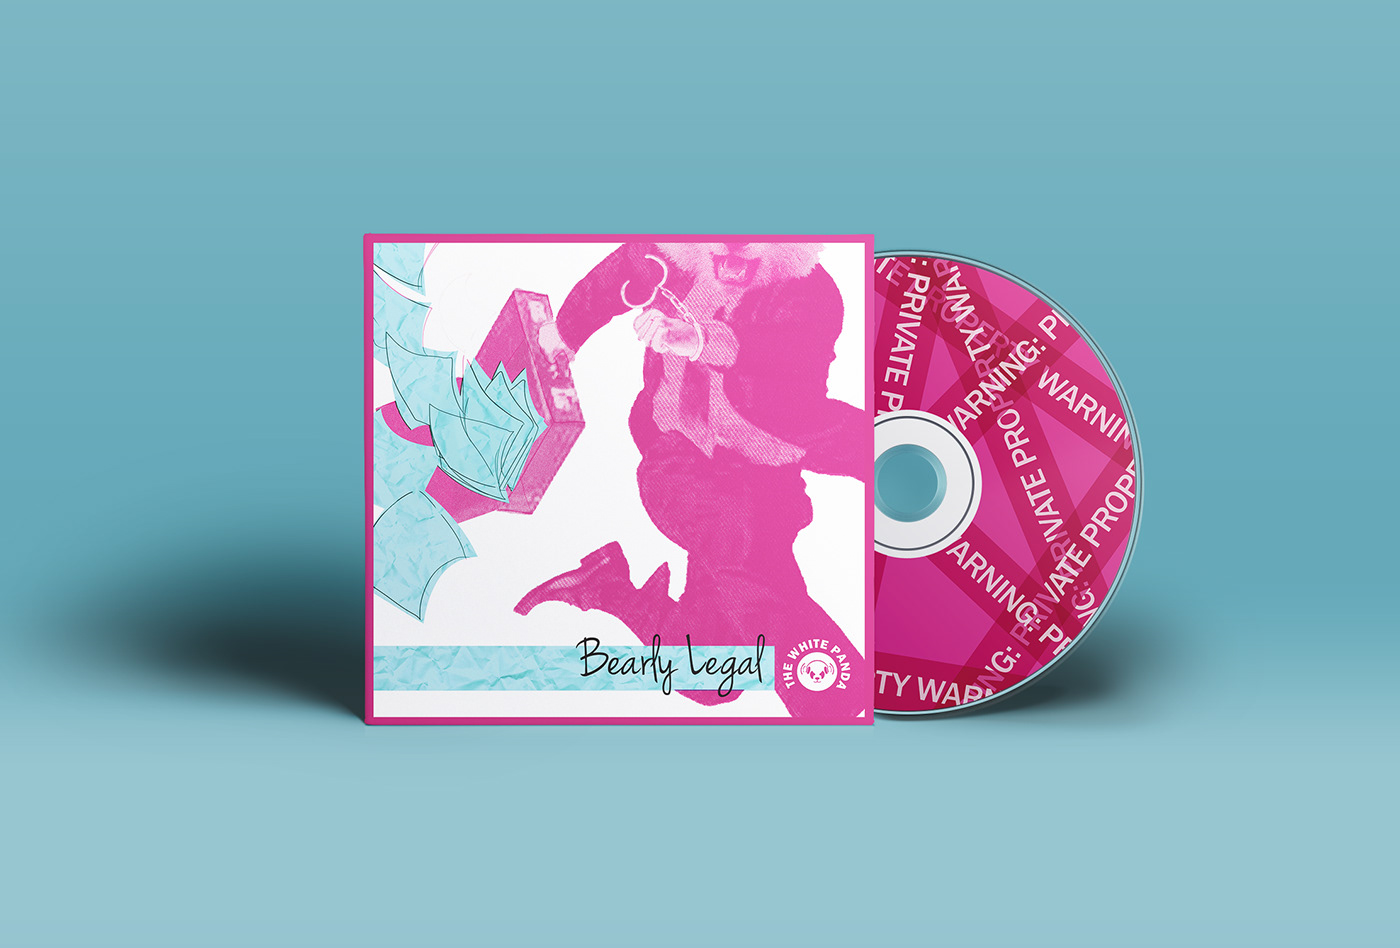 cd cover miami illegal song dj Album Panda  freedom poster band art pink